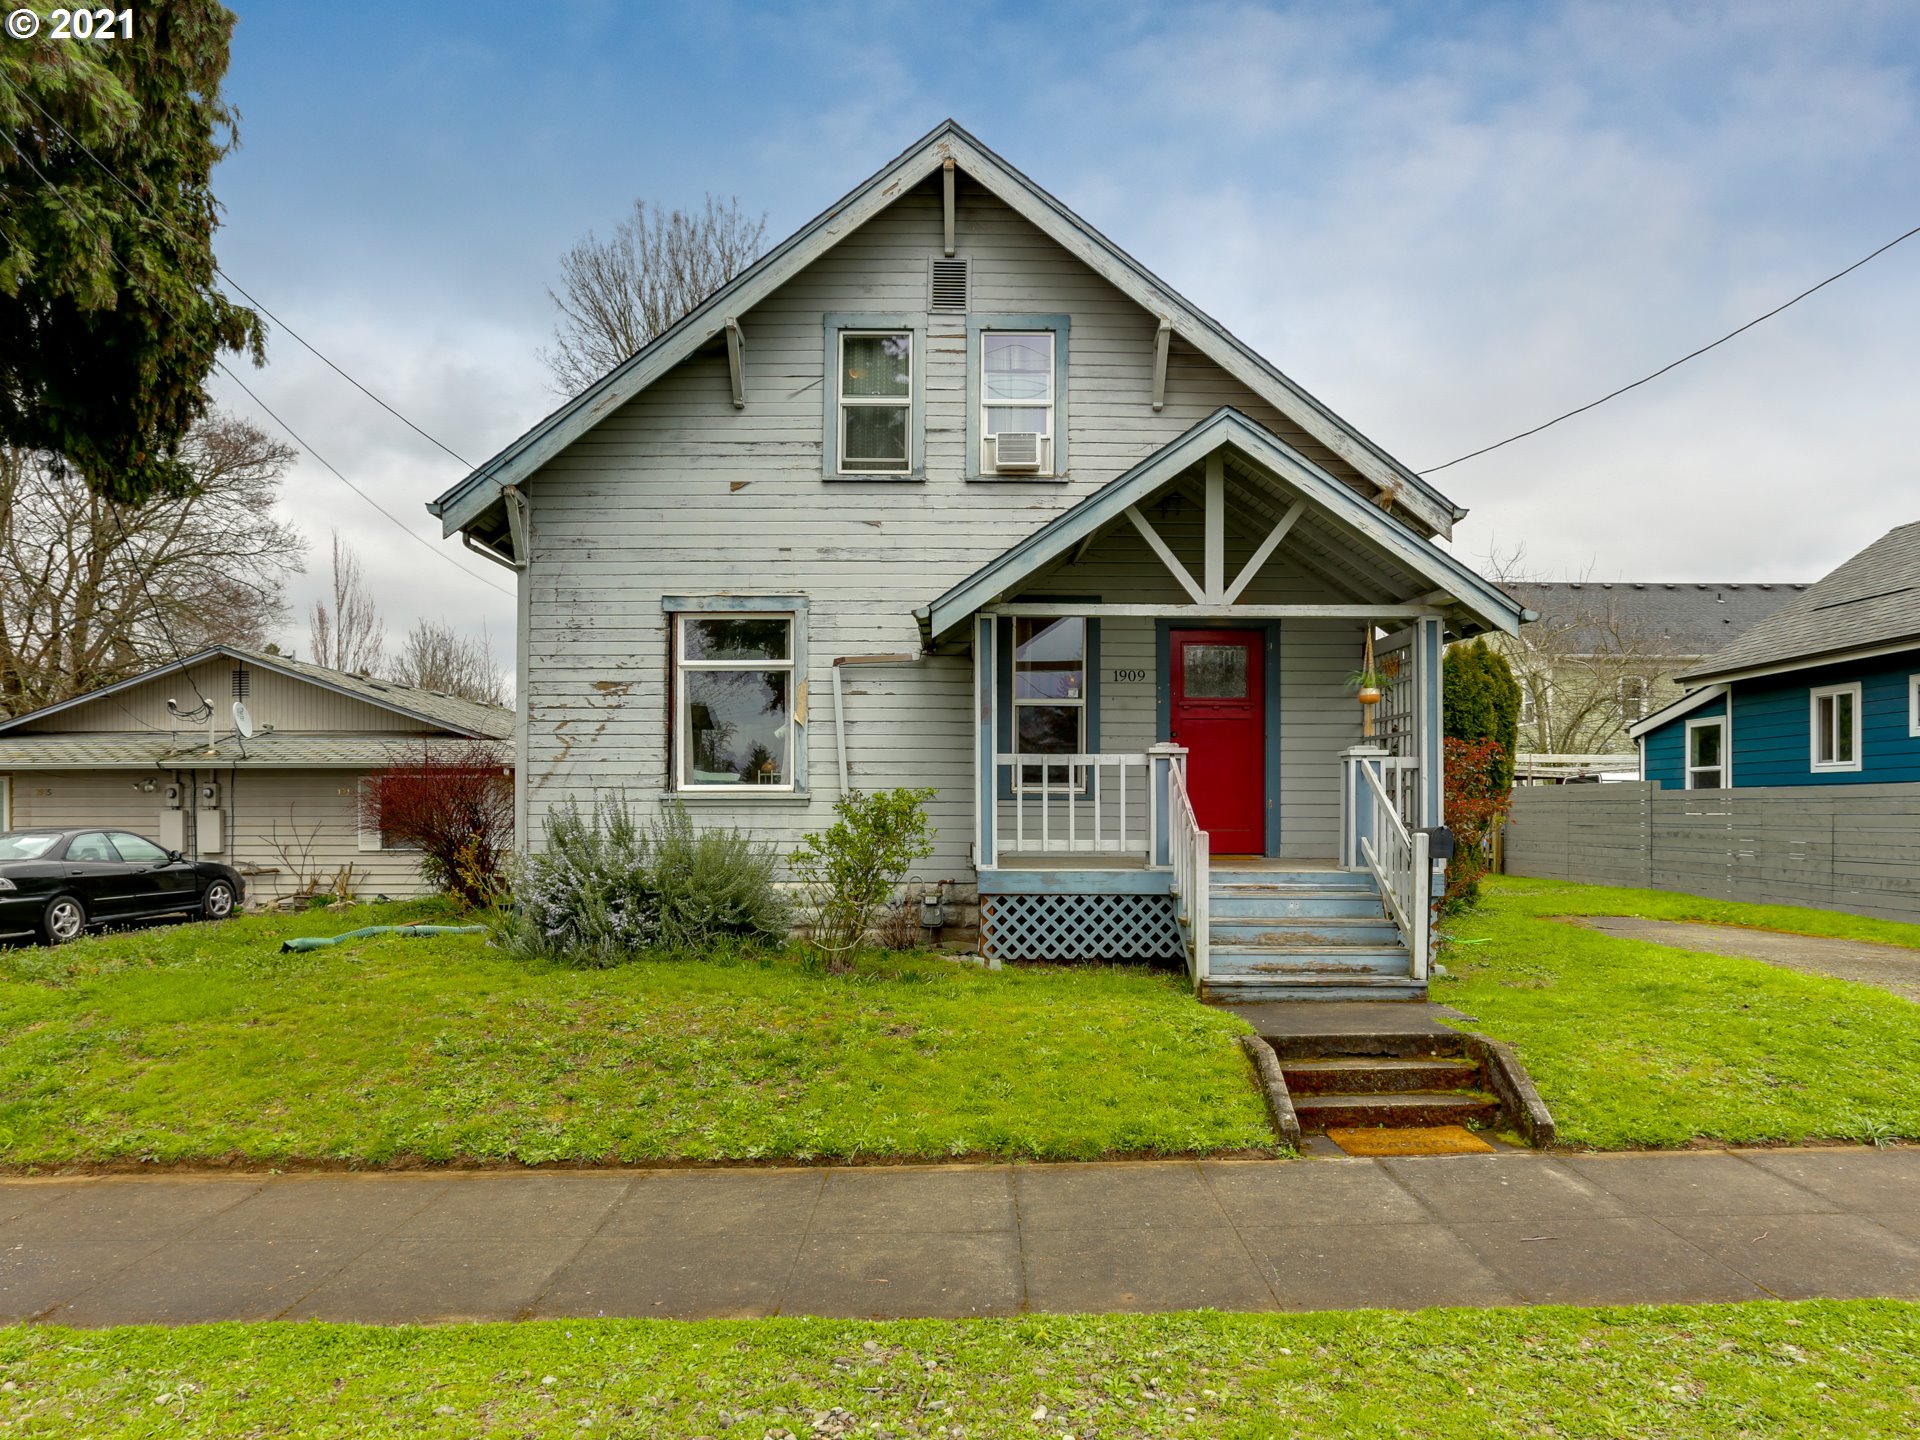 1909 HARNEY ST (1 of 24)